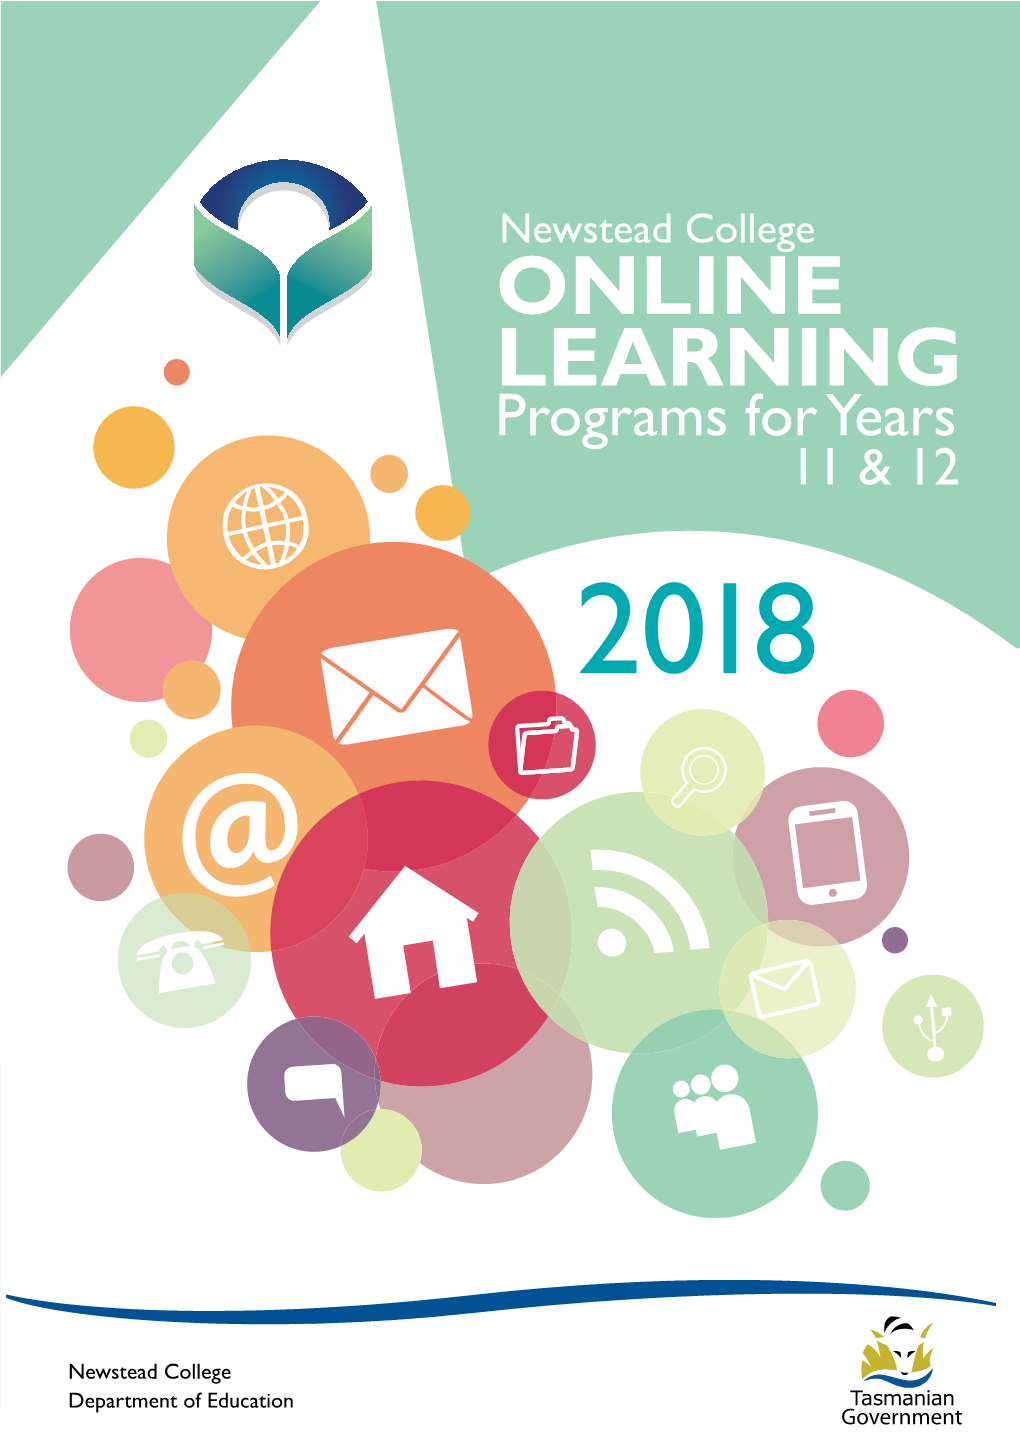 ONLINE LEARNING Programs for Years 11 & 12